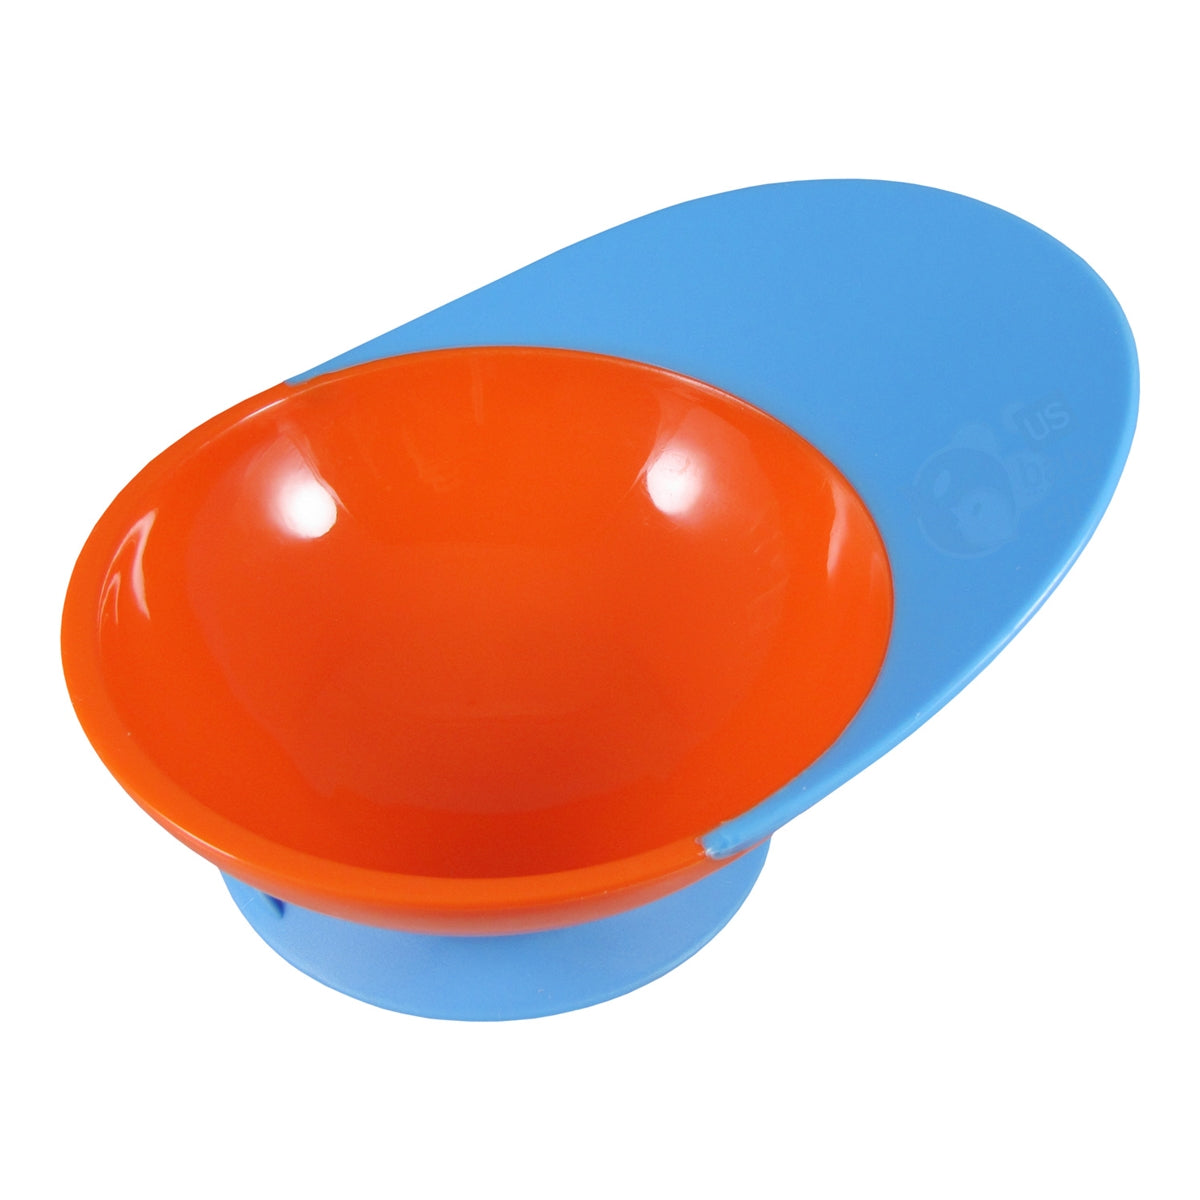 Catch Bowl Toddler Bowl with Spill Catcher - Blue/Orange (Boon)